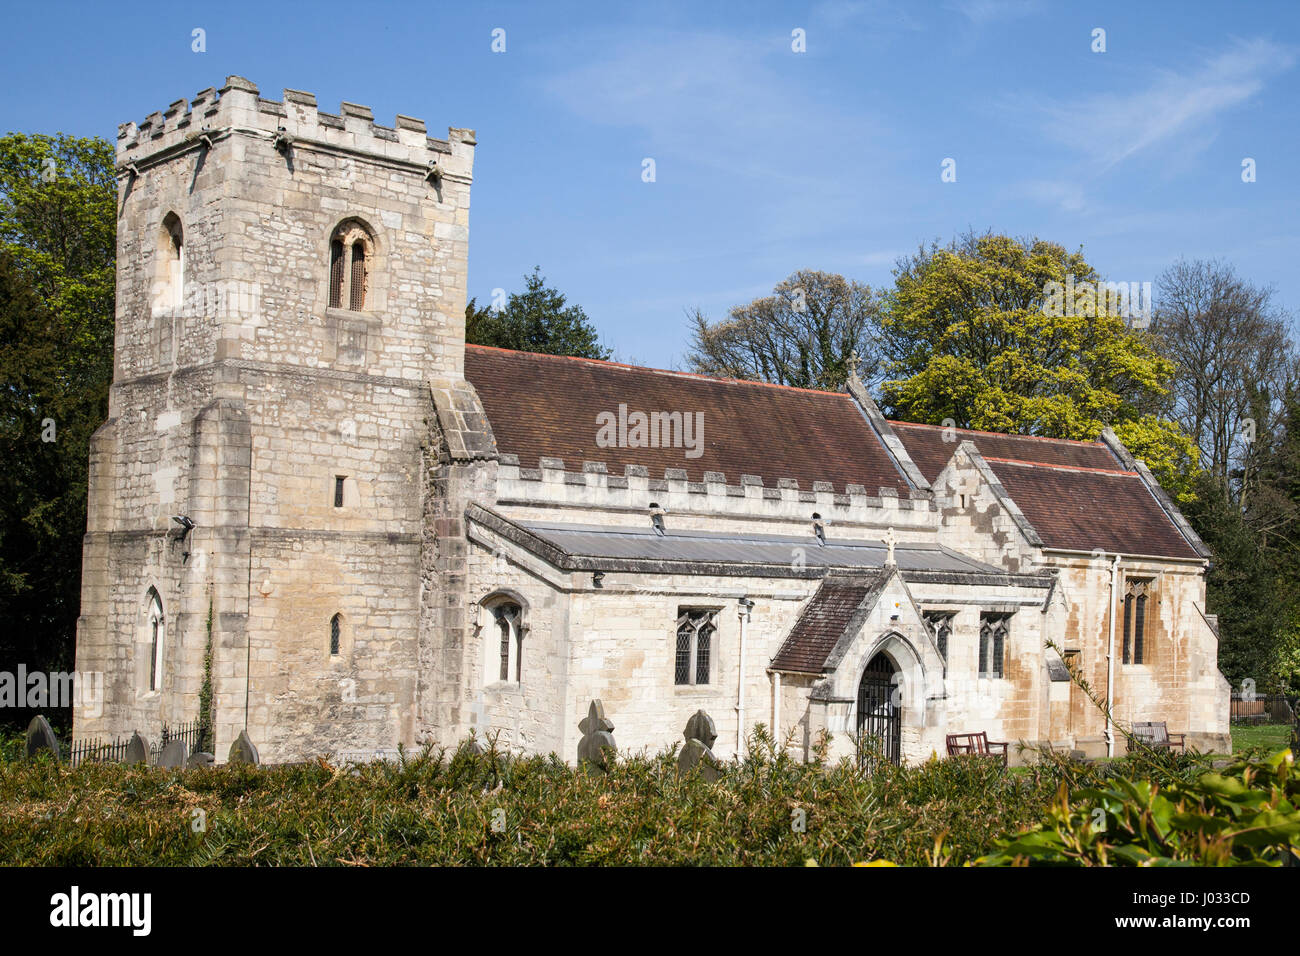 BRODSWORTH ST MICHAEL & ALL ANGELS CHURCH BRODSWORTH DONCASTER YORKSHIRE UK Stock Photo